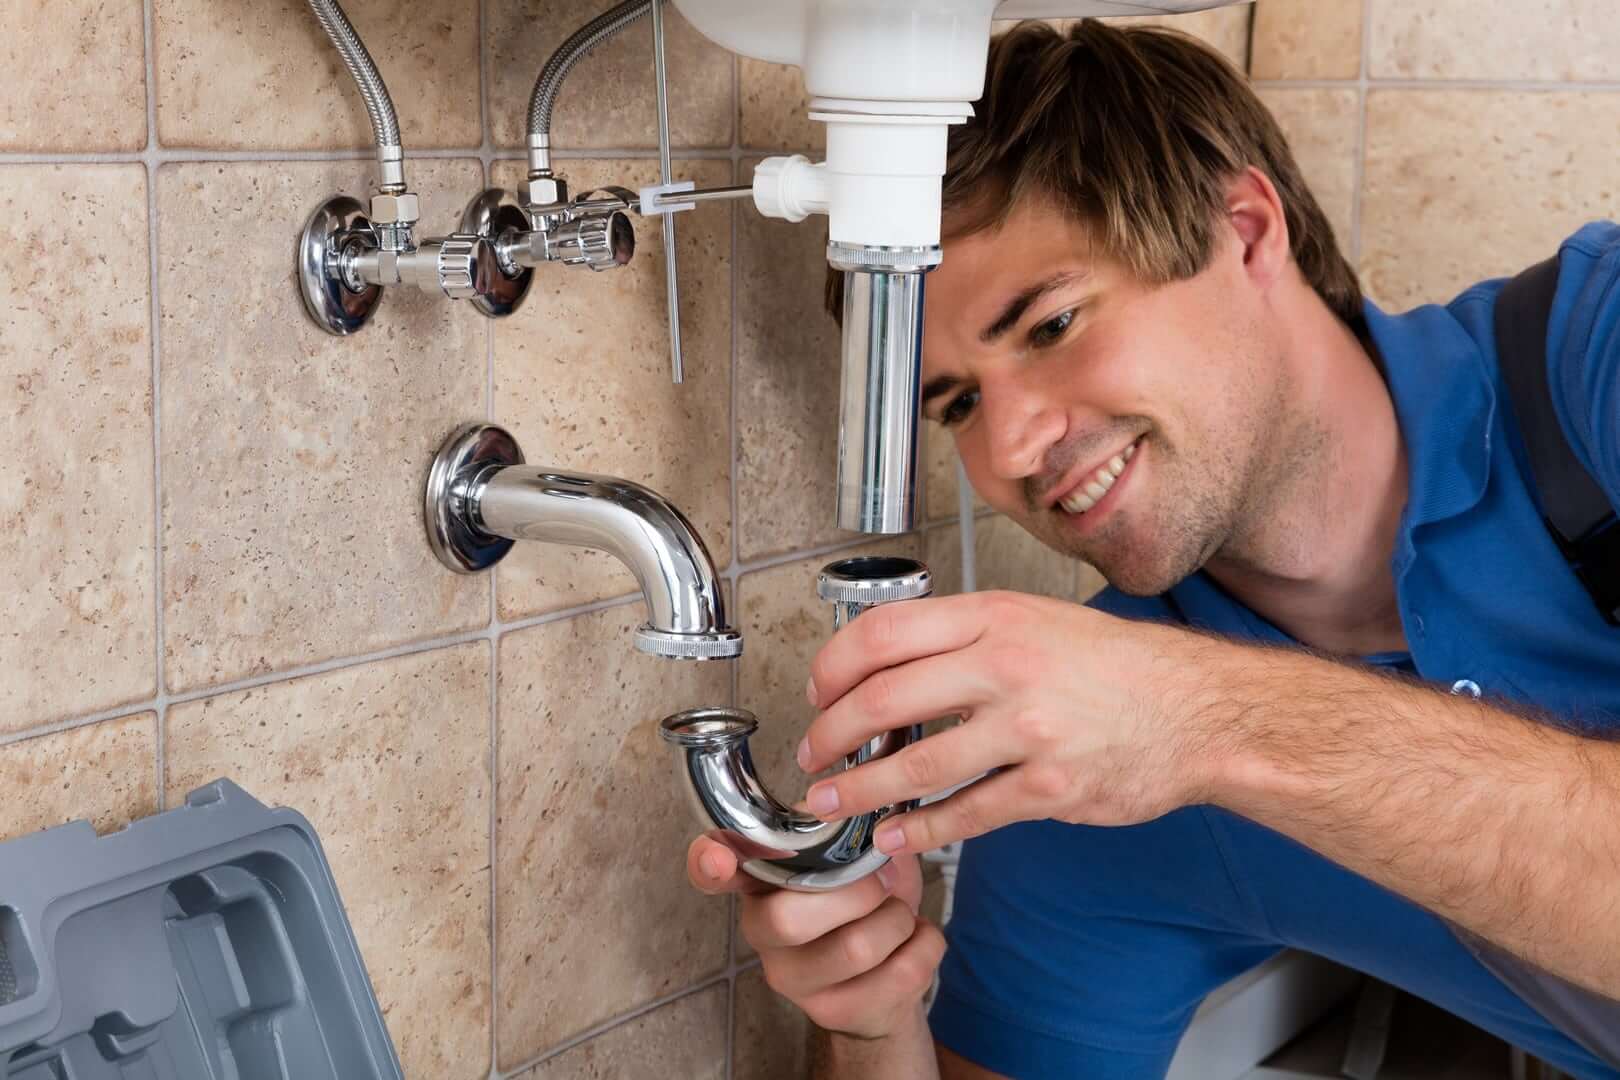 Care Plumbing Services | Drain Cleaning, Hydro Jetting, & Water Heater Installations Services | Miami, Coral Way, Brickell